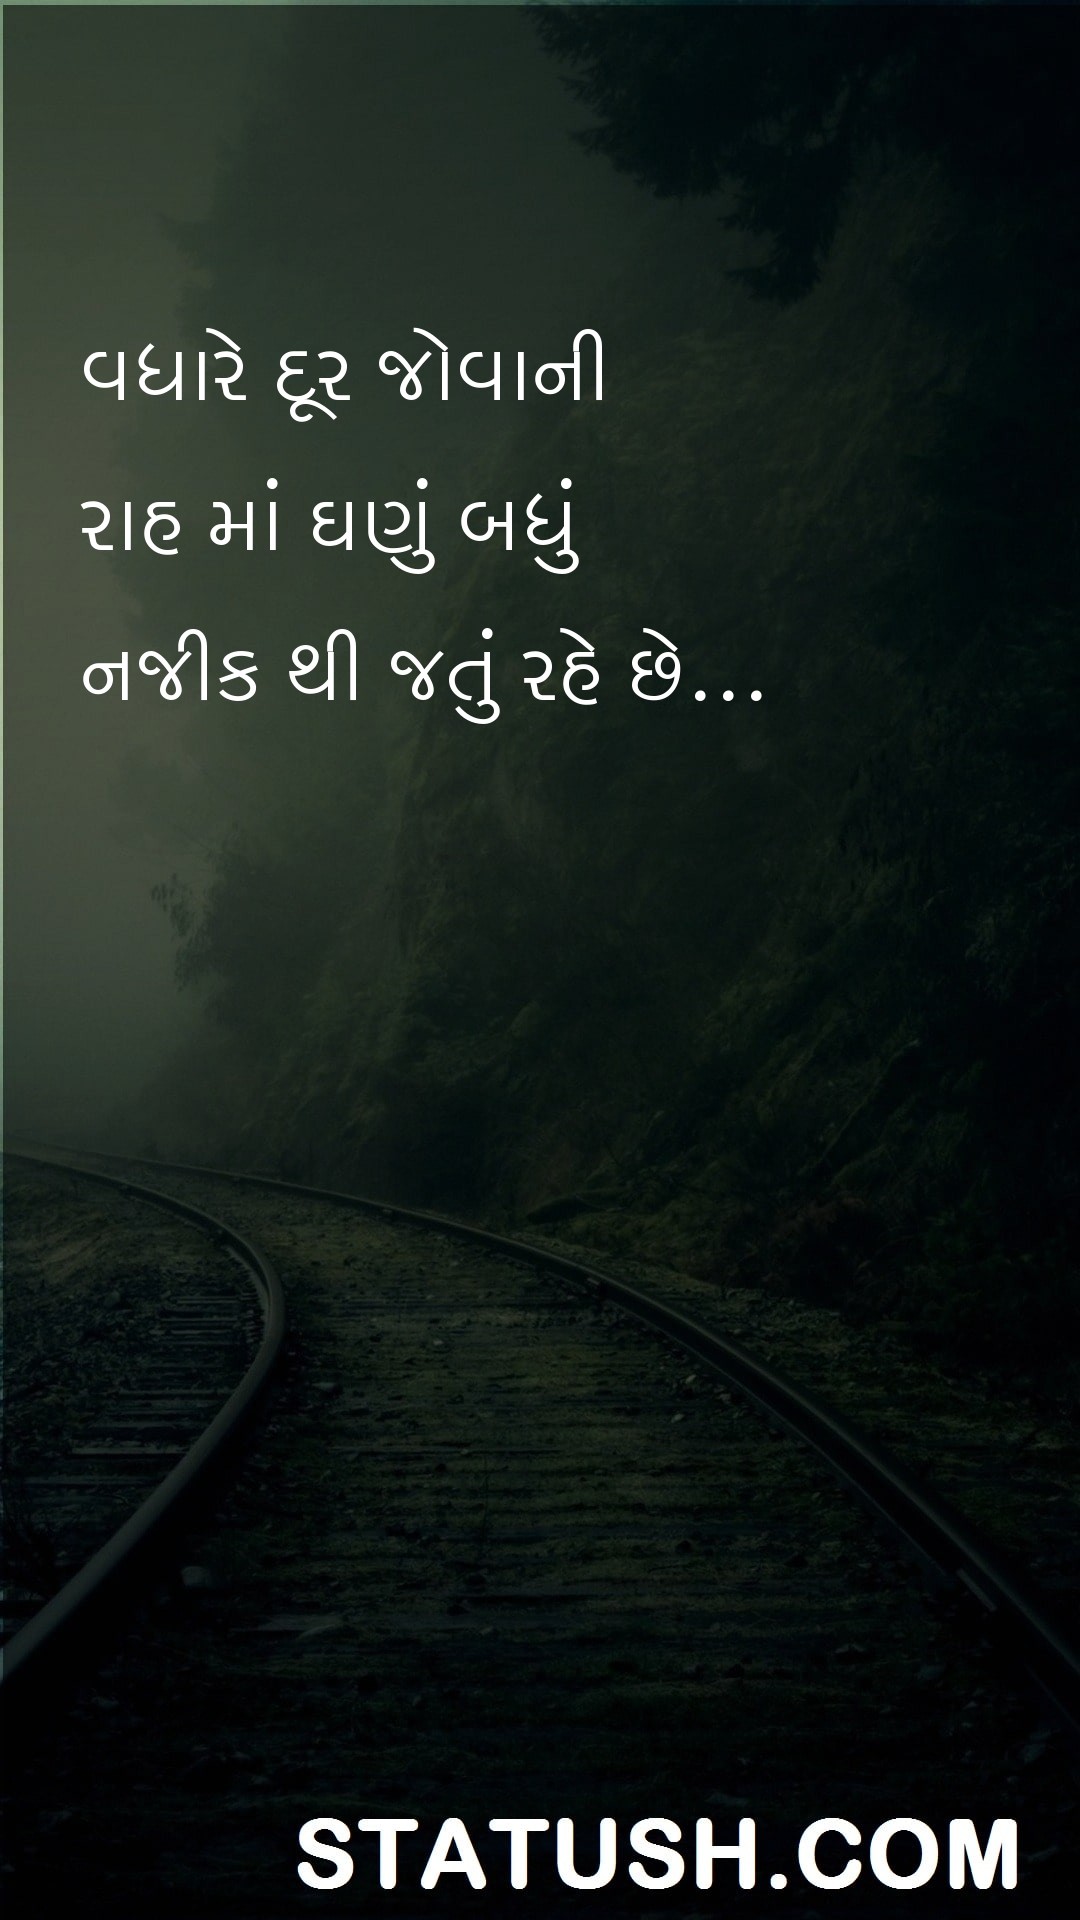 In looking farther A lot is going on - Gujarati Quotes at statush.com